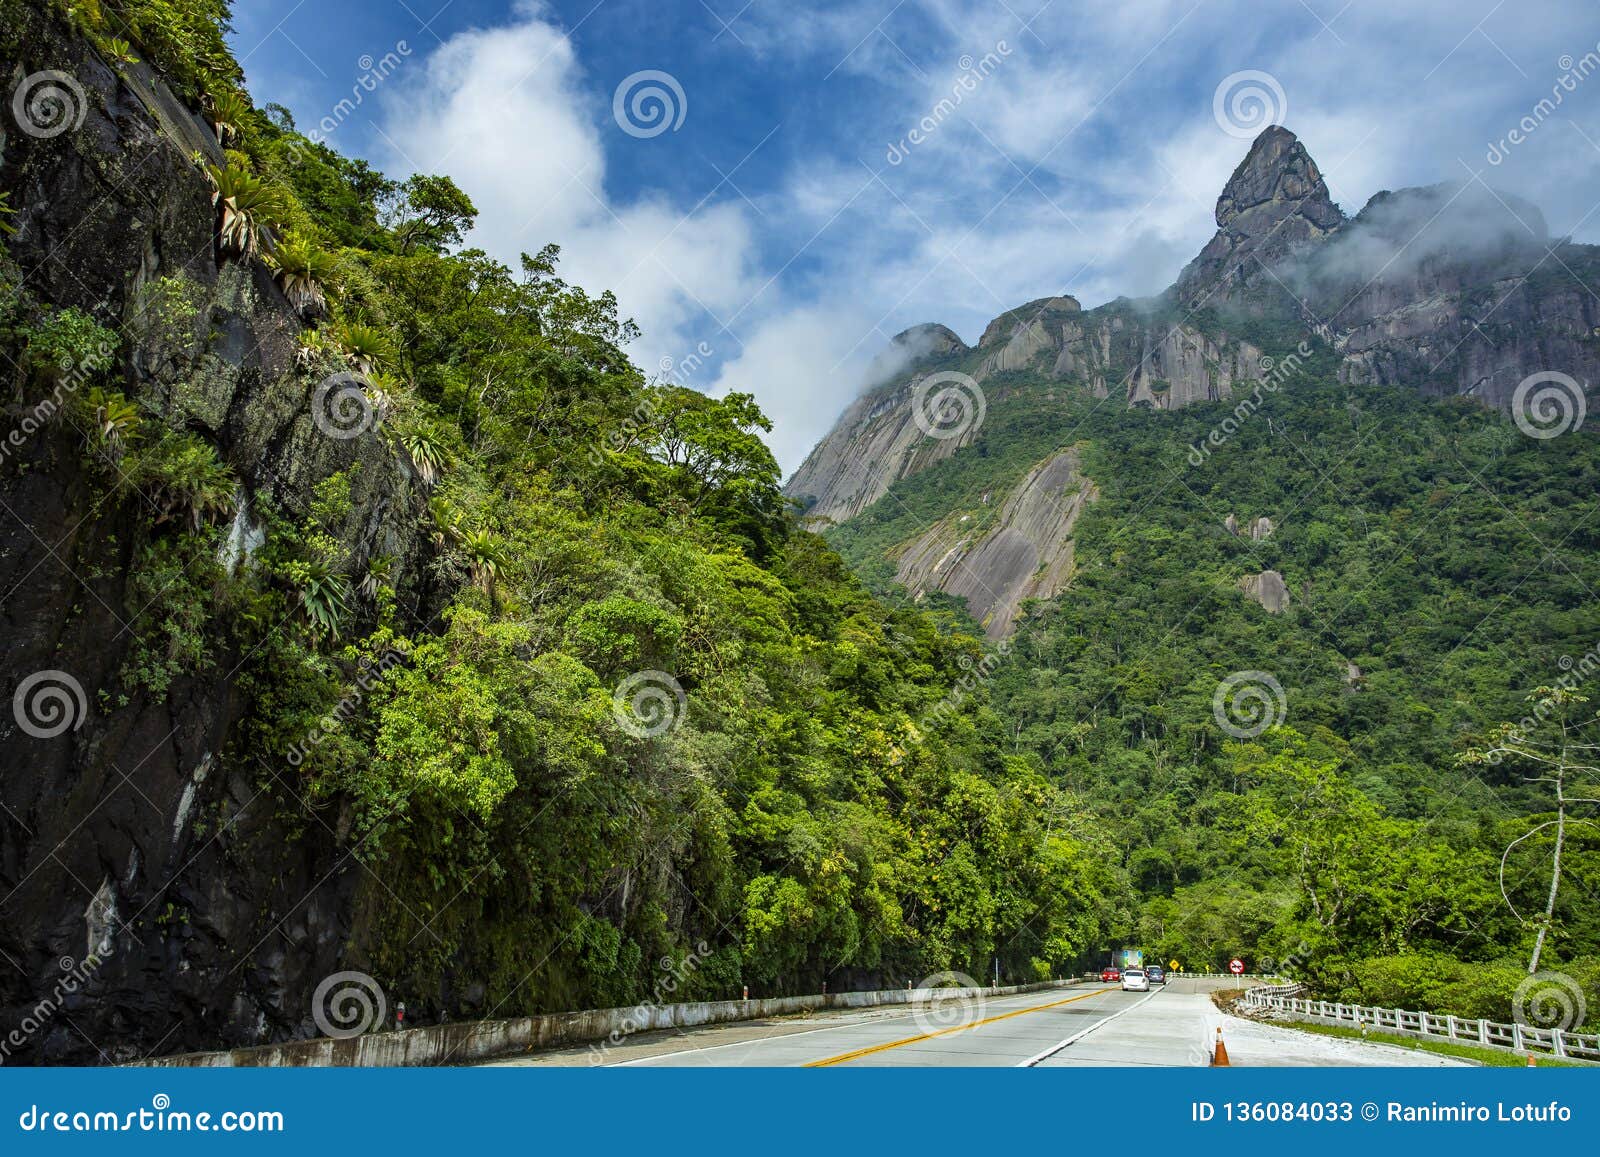 Beautiful Mountain, Finger of God in the City of Teresopolis, State of ...